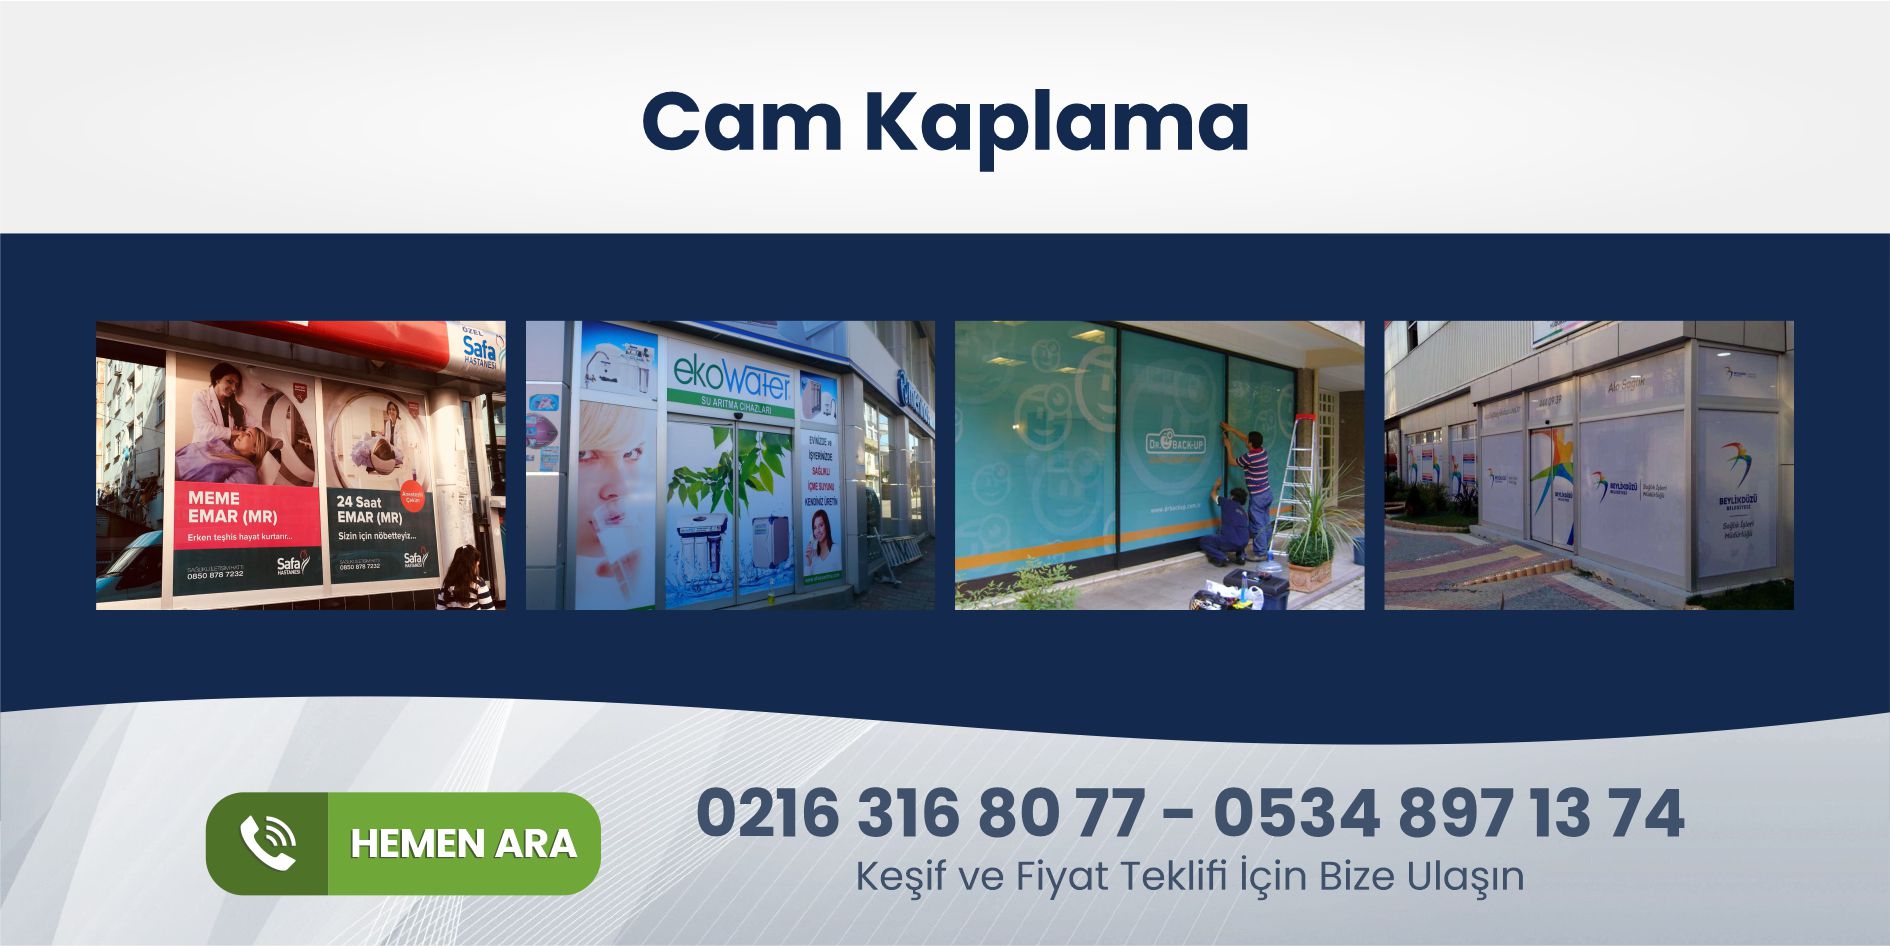 You are currently viewing Beykoz Ofis Cam Kaplama